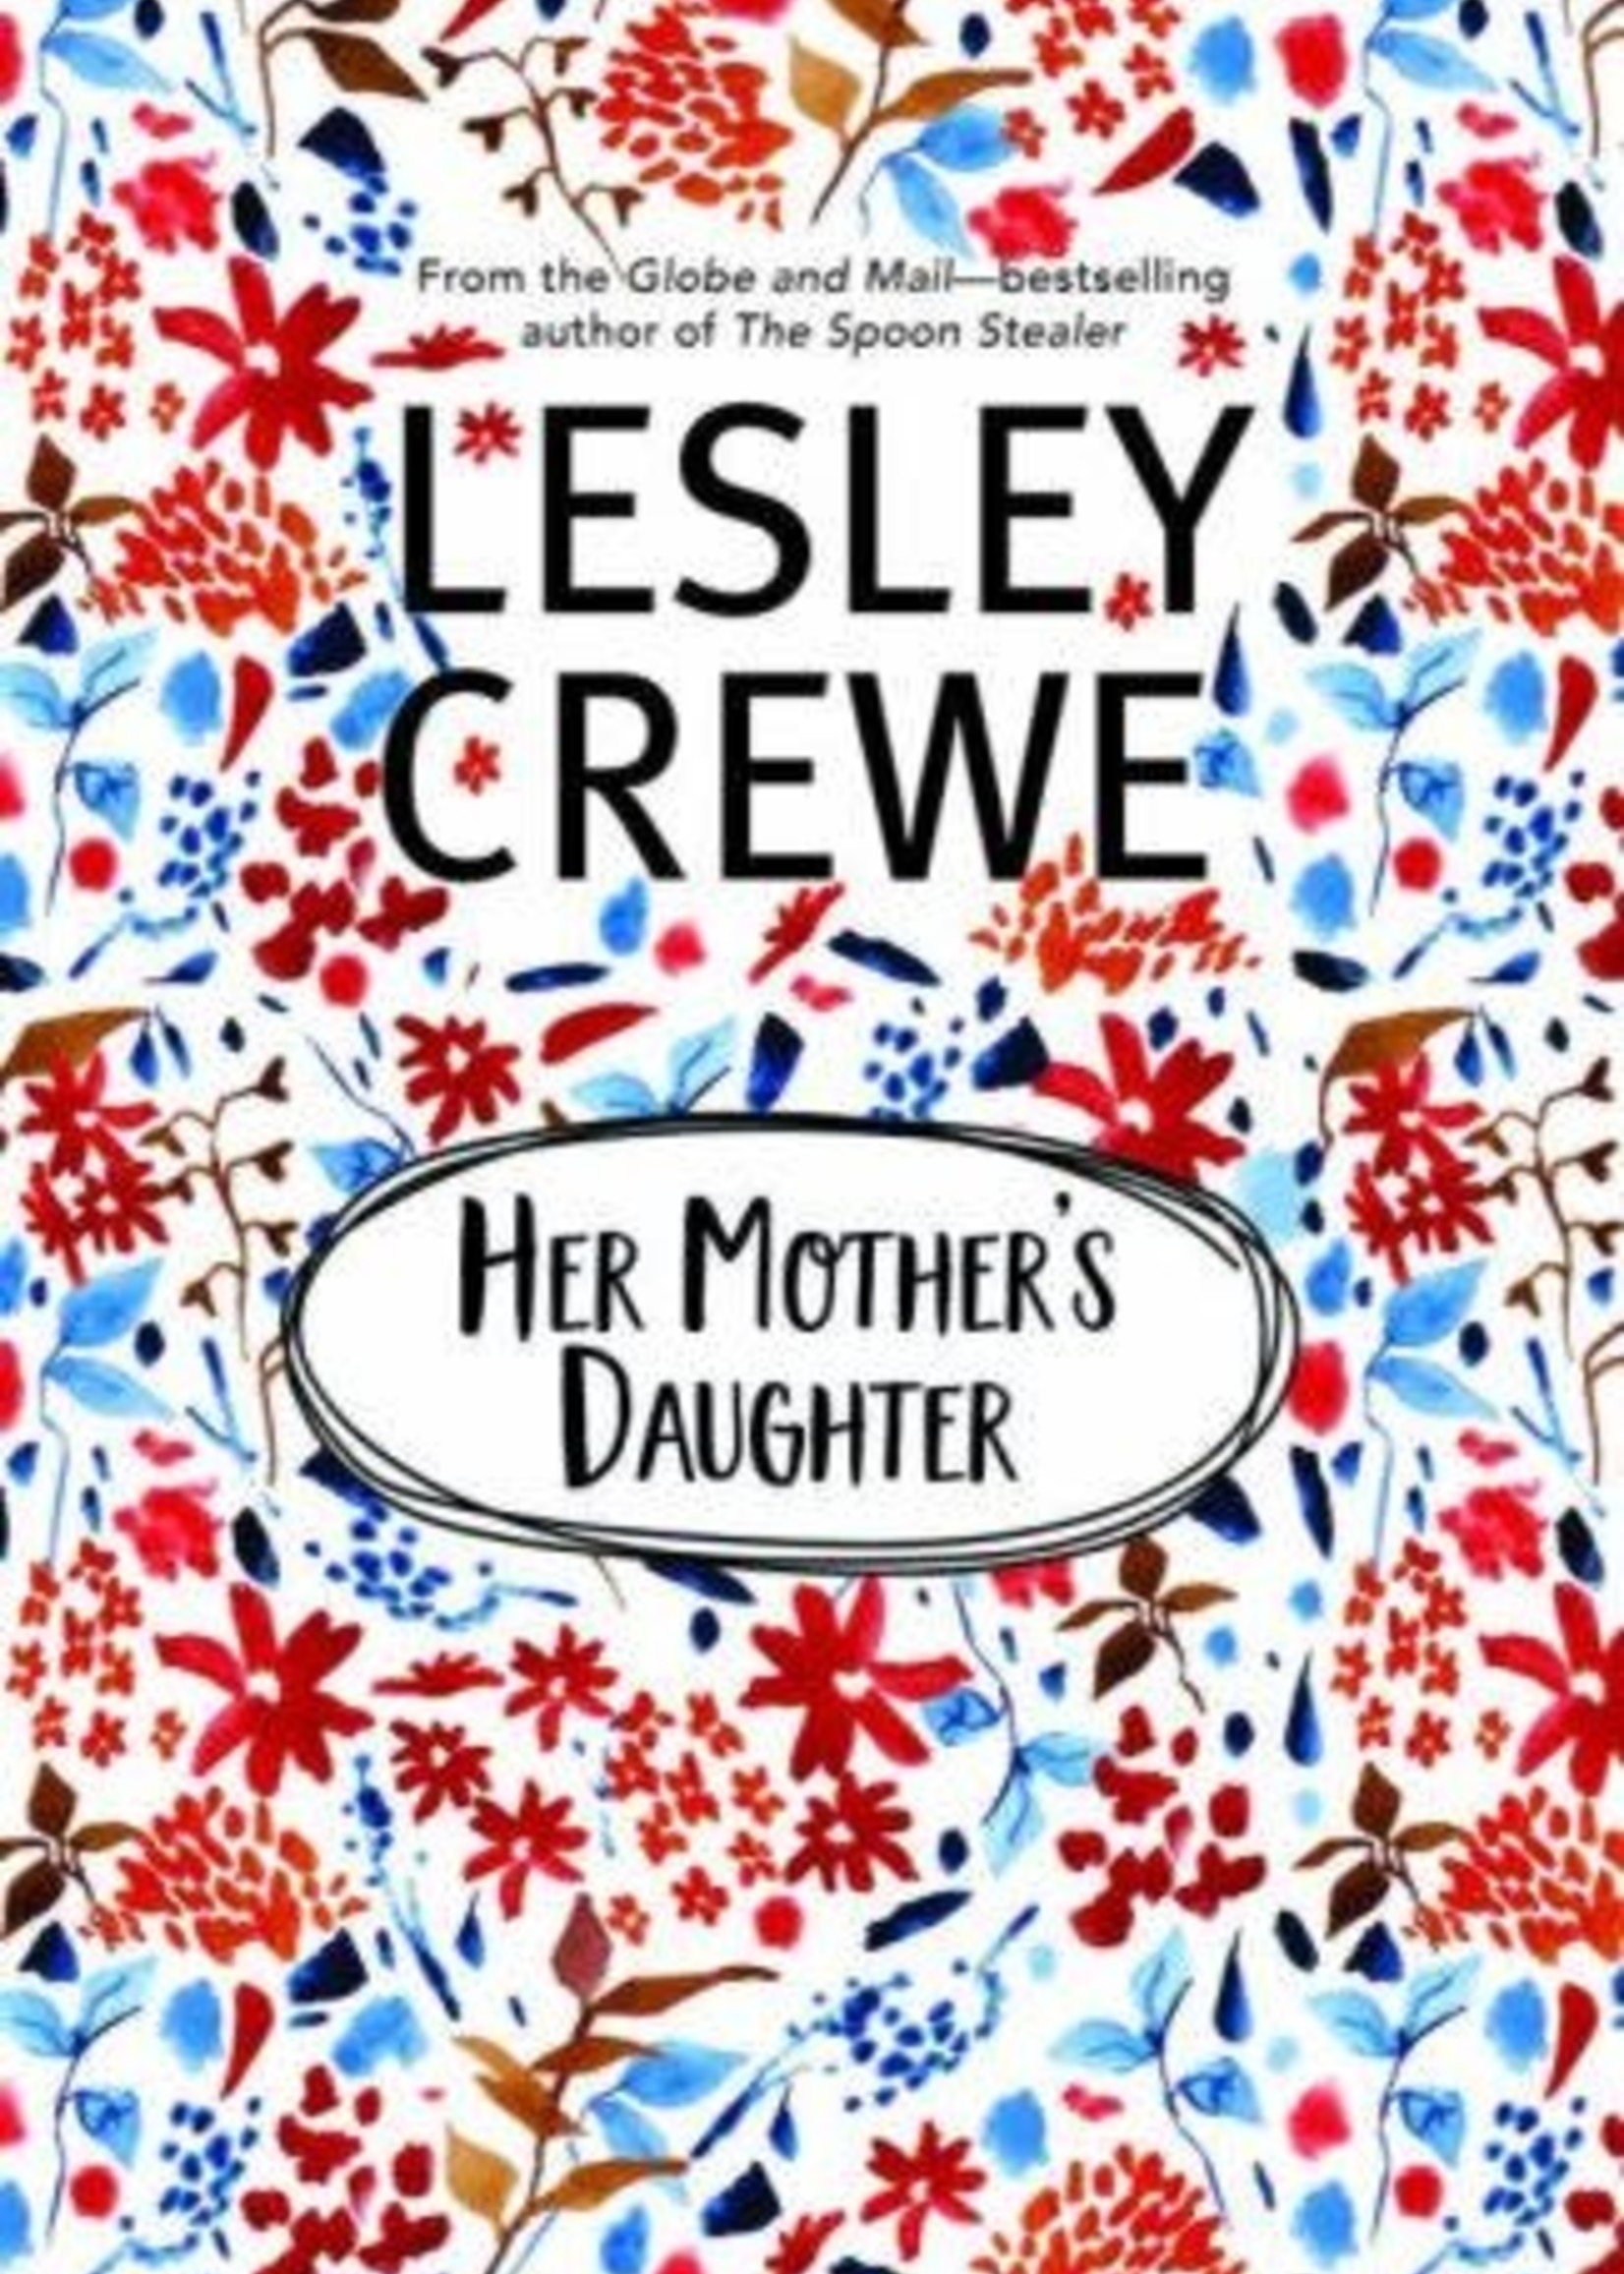 Her Mother’s Daughter by Lesley Crewe